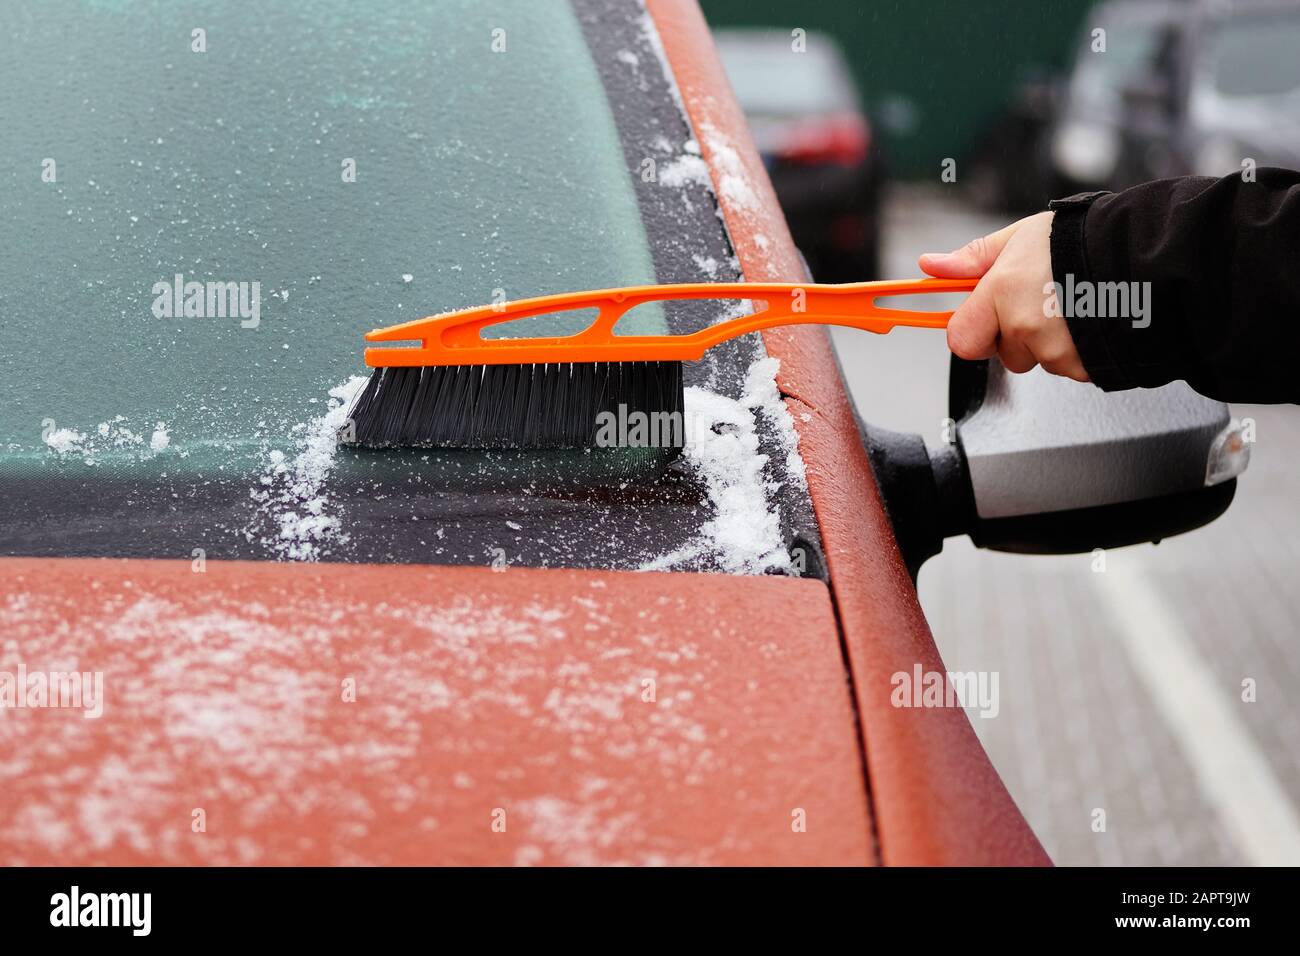 Man clears snow from icy windows of car. Orange brush in mans hand. Windshield of car, horizontal view. Stock Photo